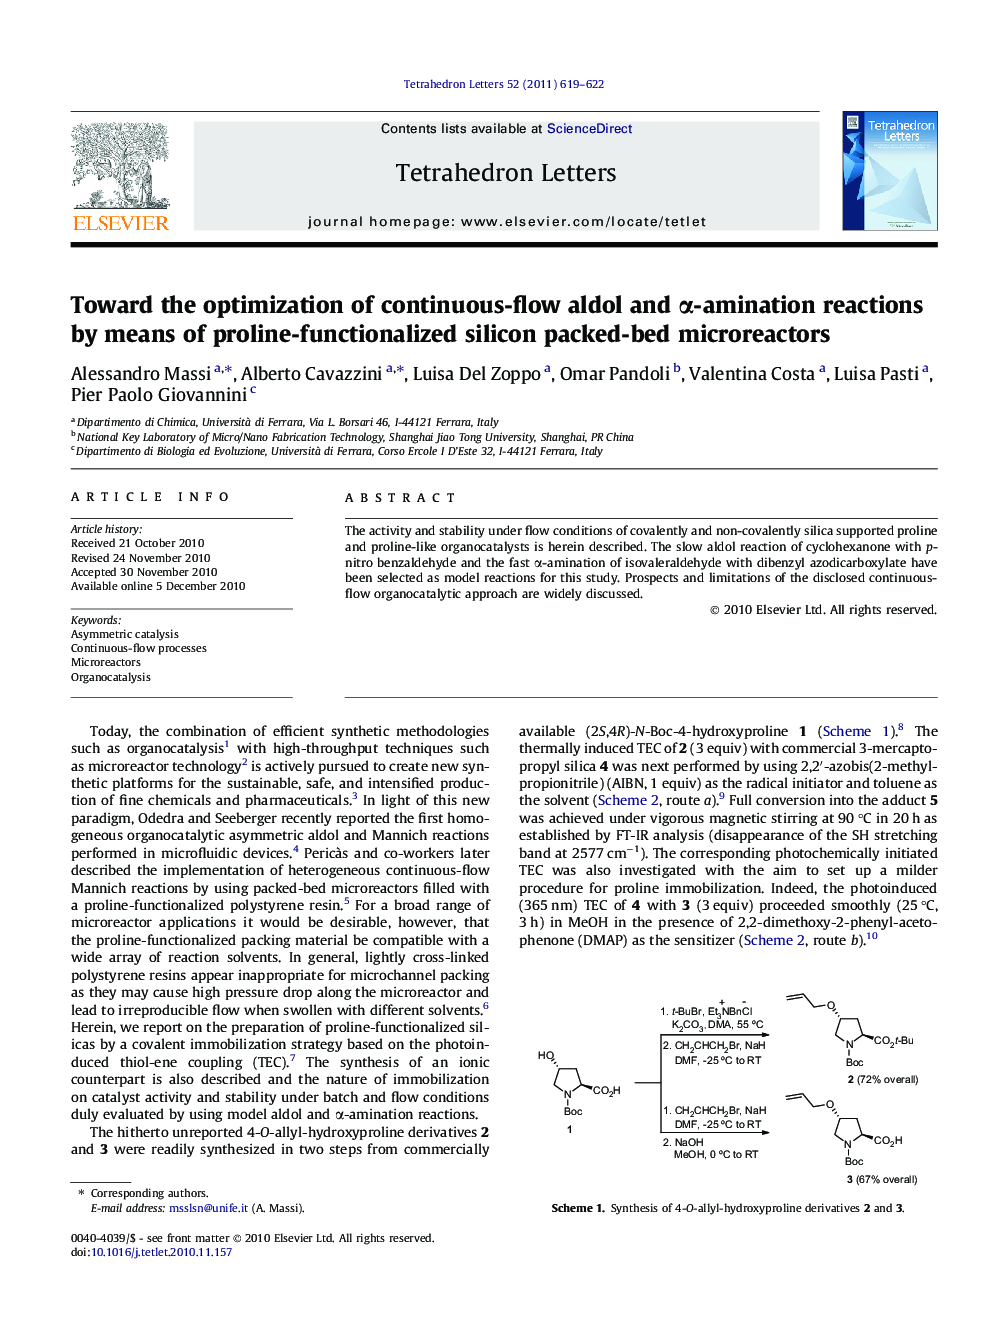 Toward the optimization of continuous-flow aldol and Î±-amination reactions by means of proline-functionalized silicon packed-bed microreactors